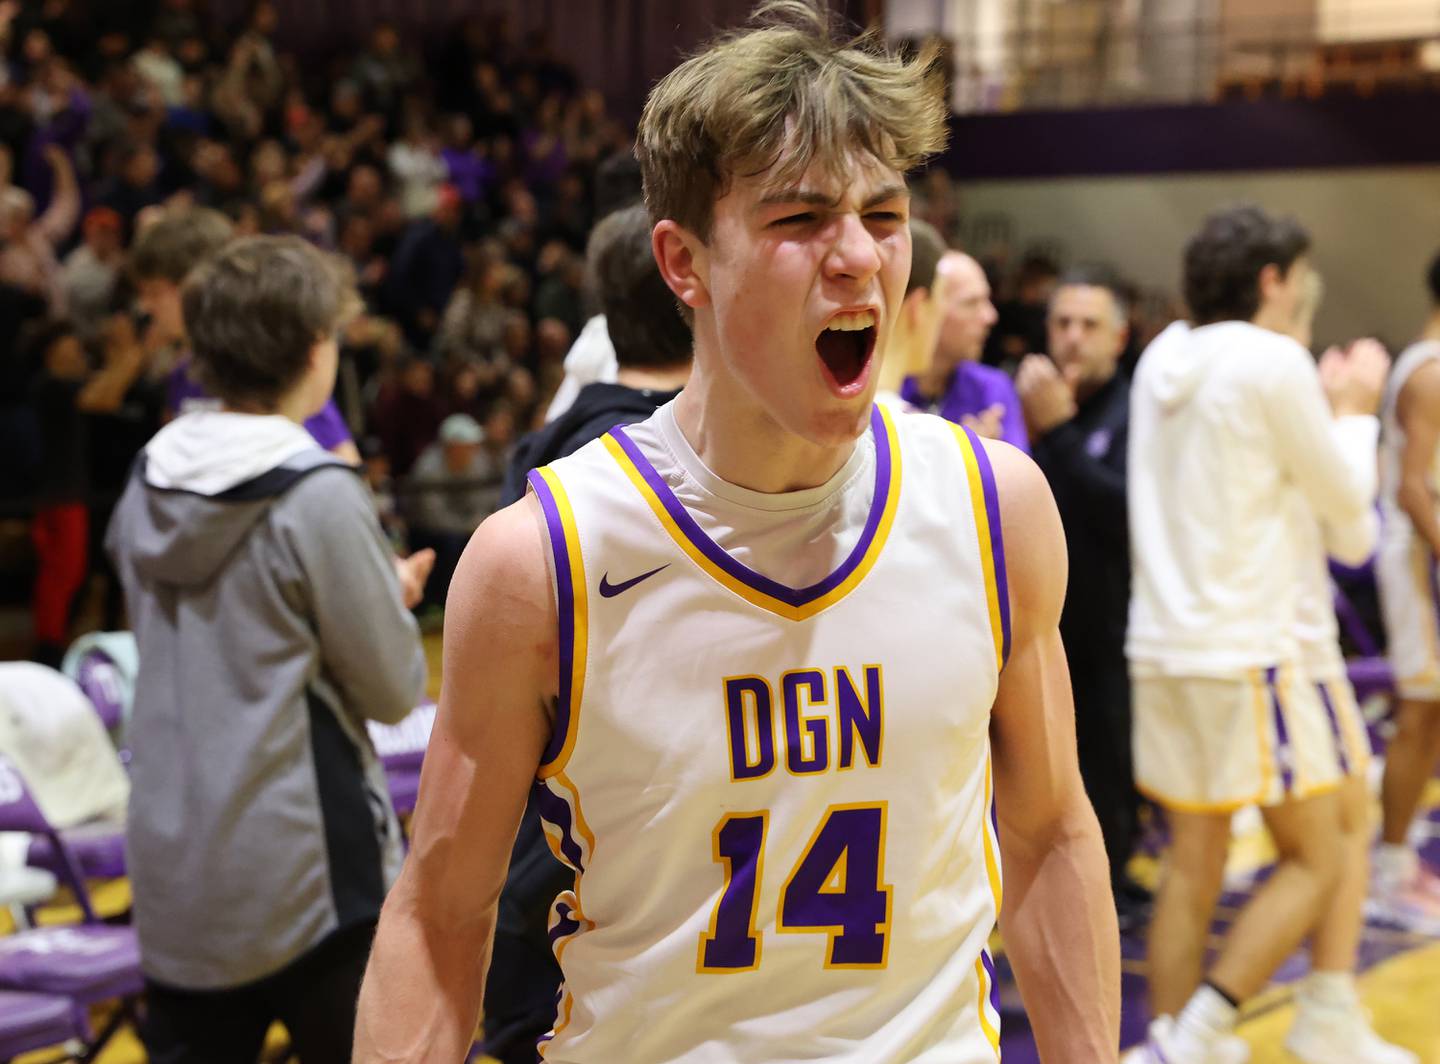 DGN's Maxwell Haack (14) reacts to winning the boys 4A varsity regional final between Downers Grove North and Proviso East in Downers Groves on Friday, Feb. 24, 2023.